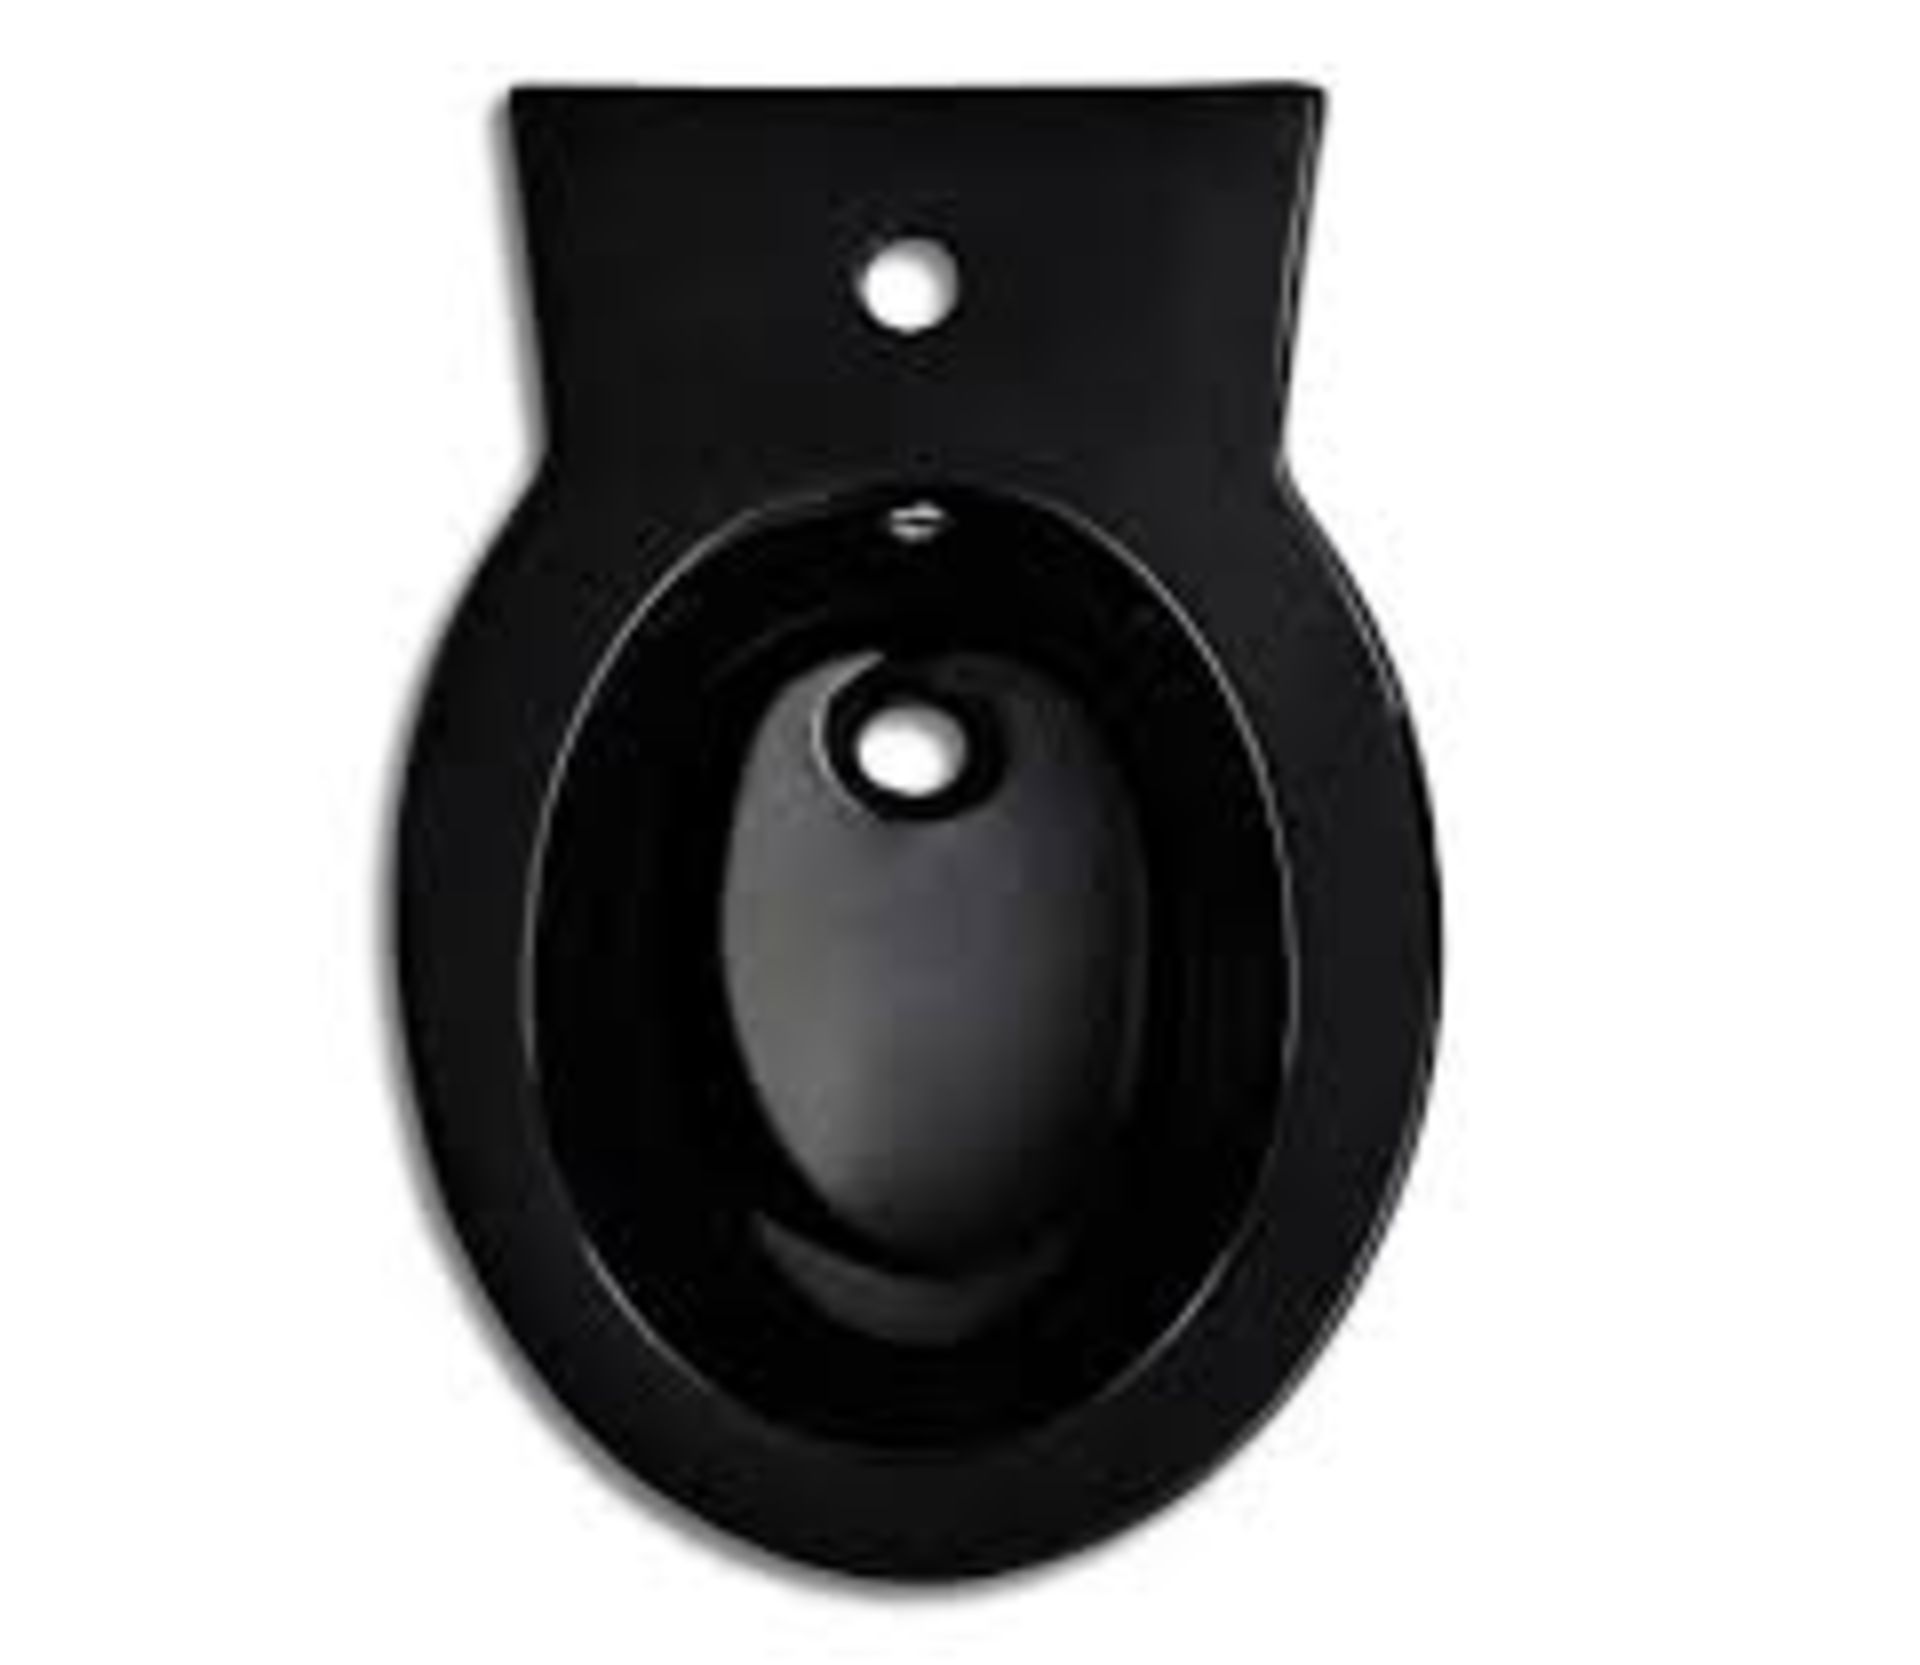 Boxed Vida XL Black Gloss Bidet Stand RRP £280 (18950) (Pictures Are For Illustration Purposes Only)